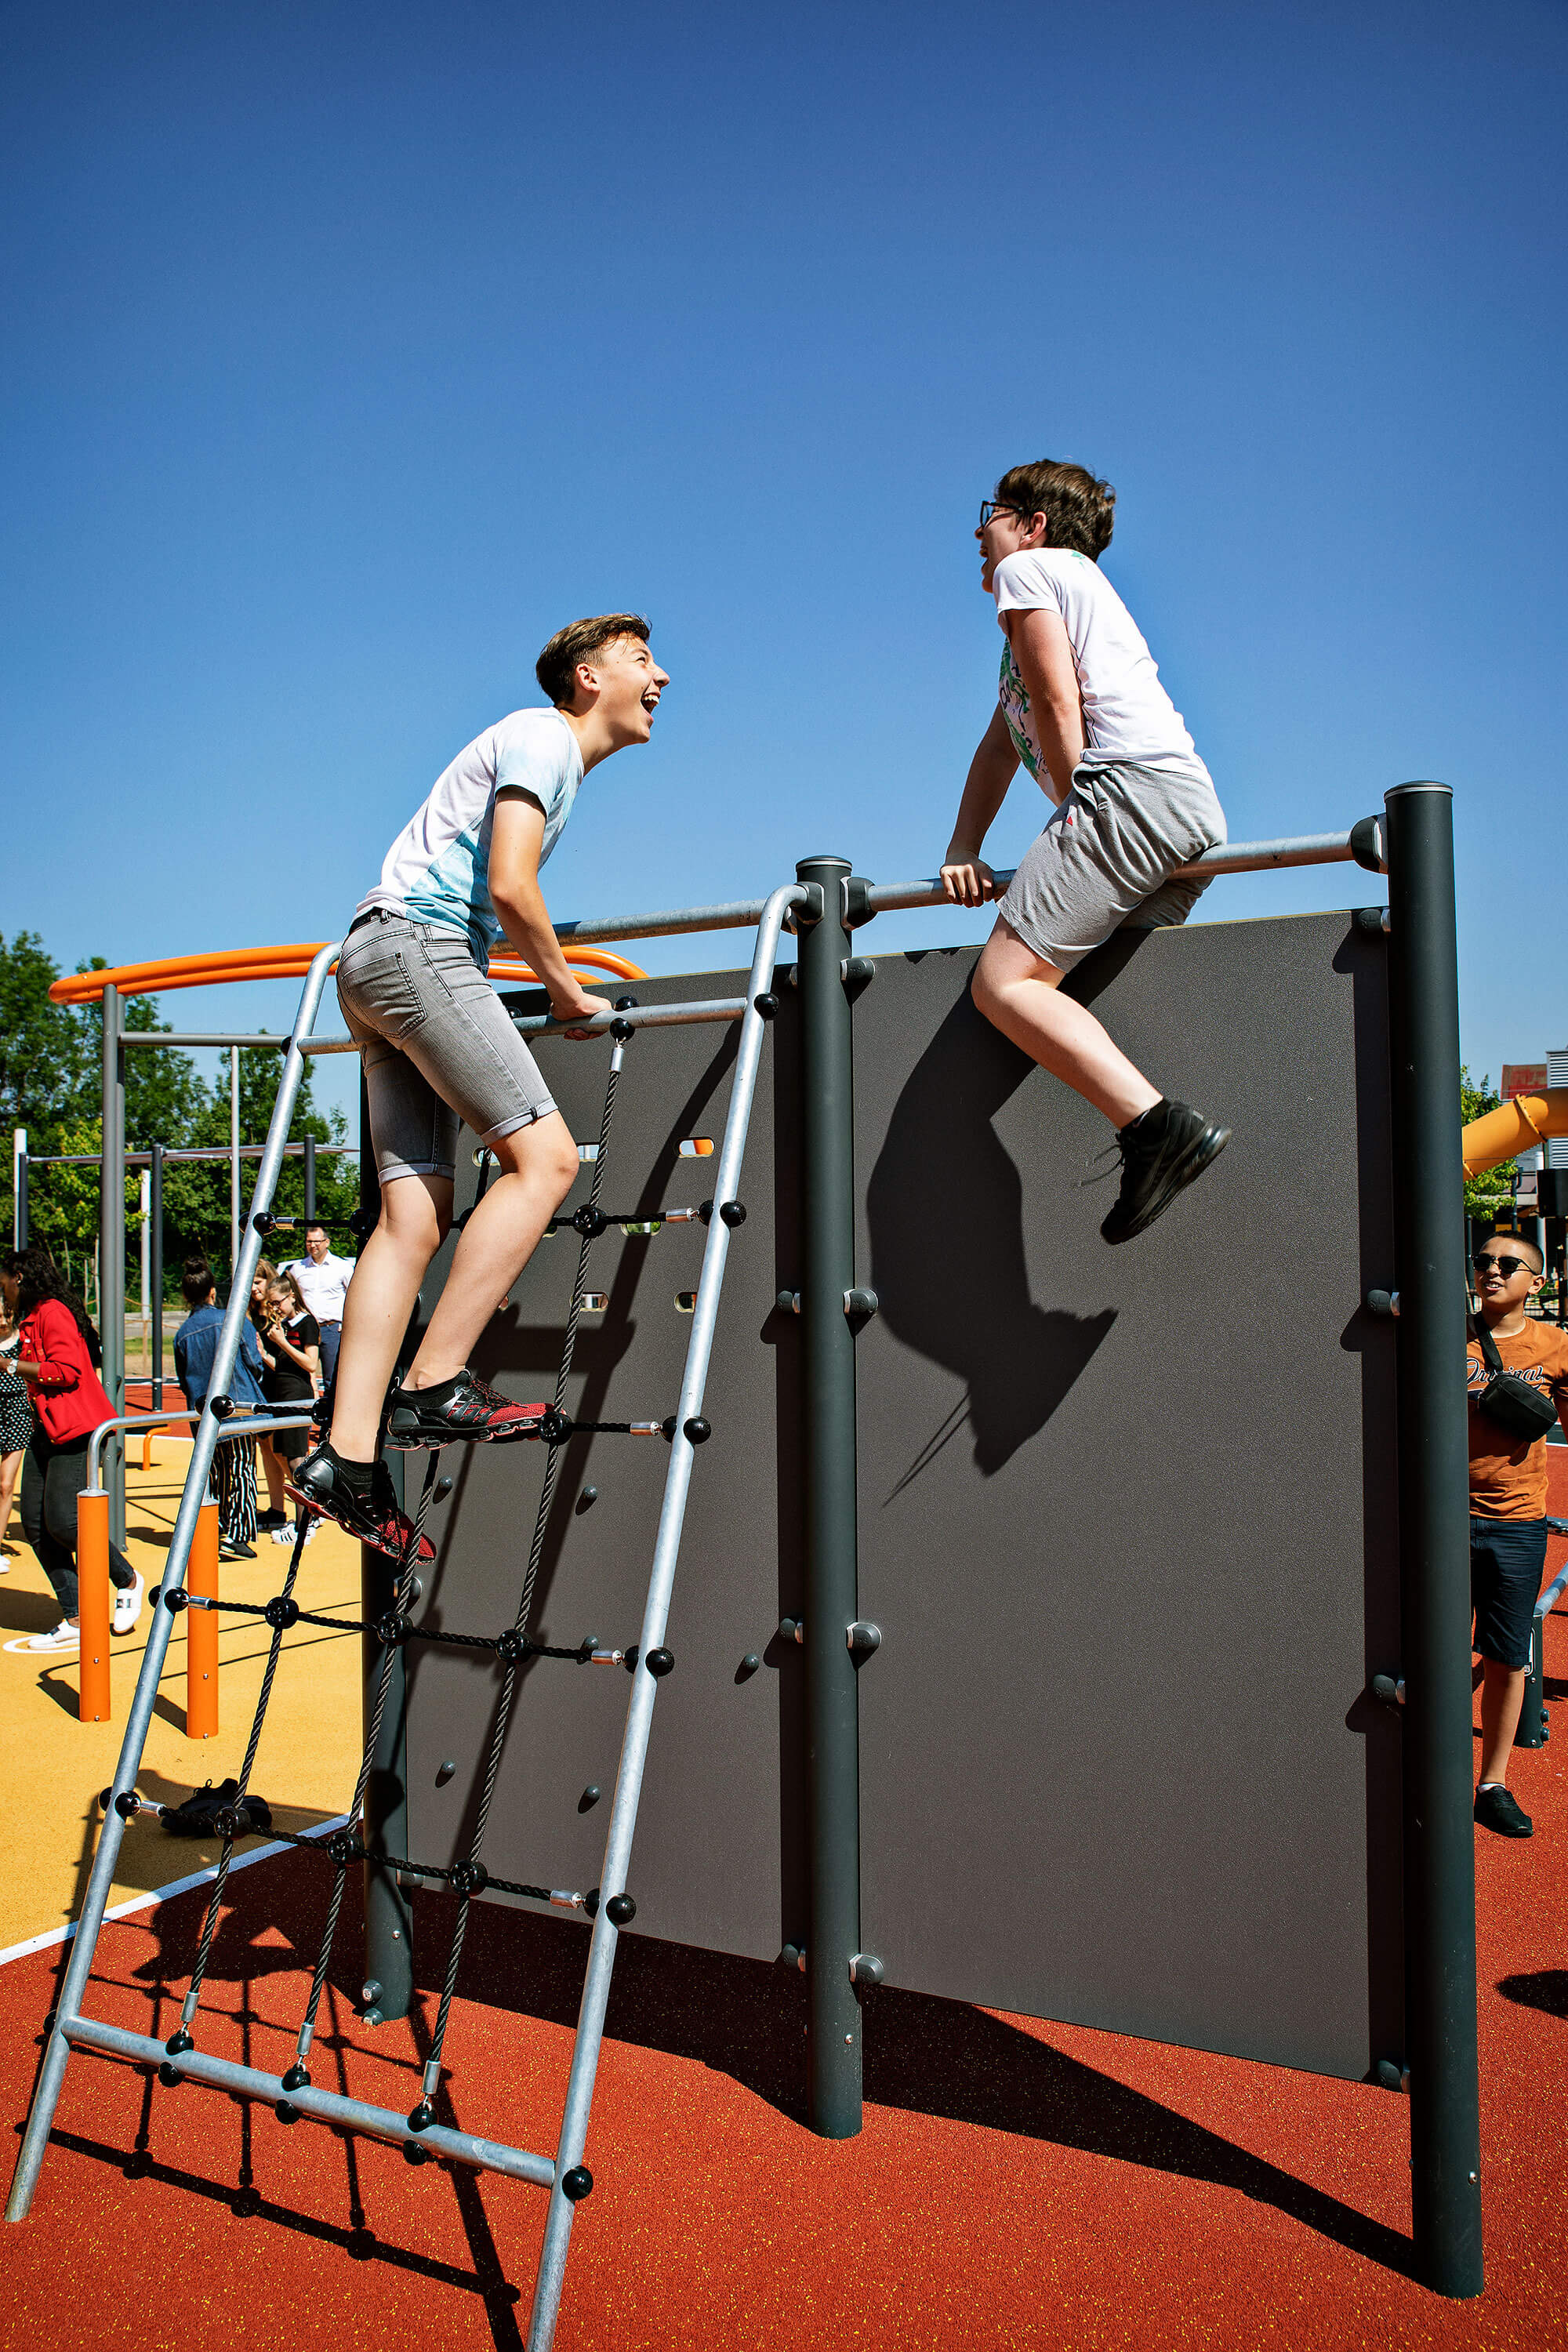 School Fitness Equipment: Durable and High Quality Outdoor Gyms